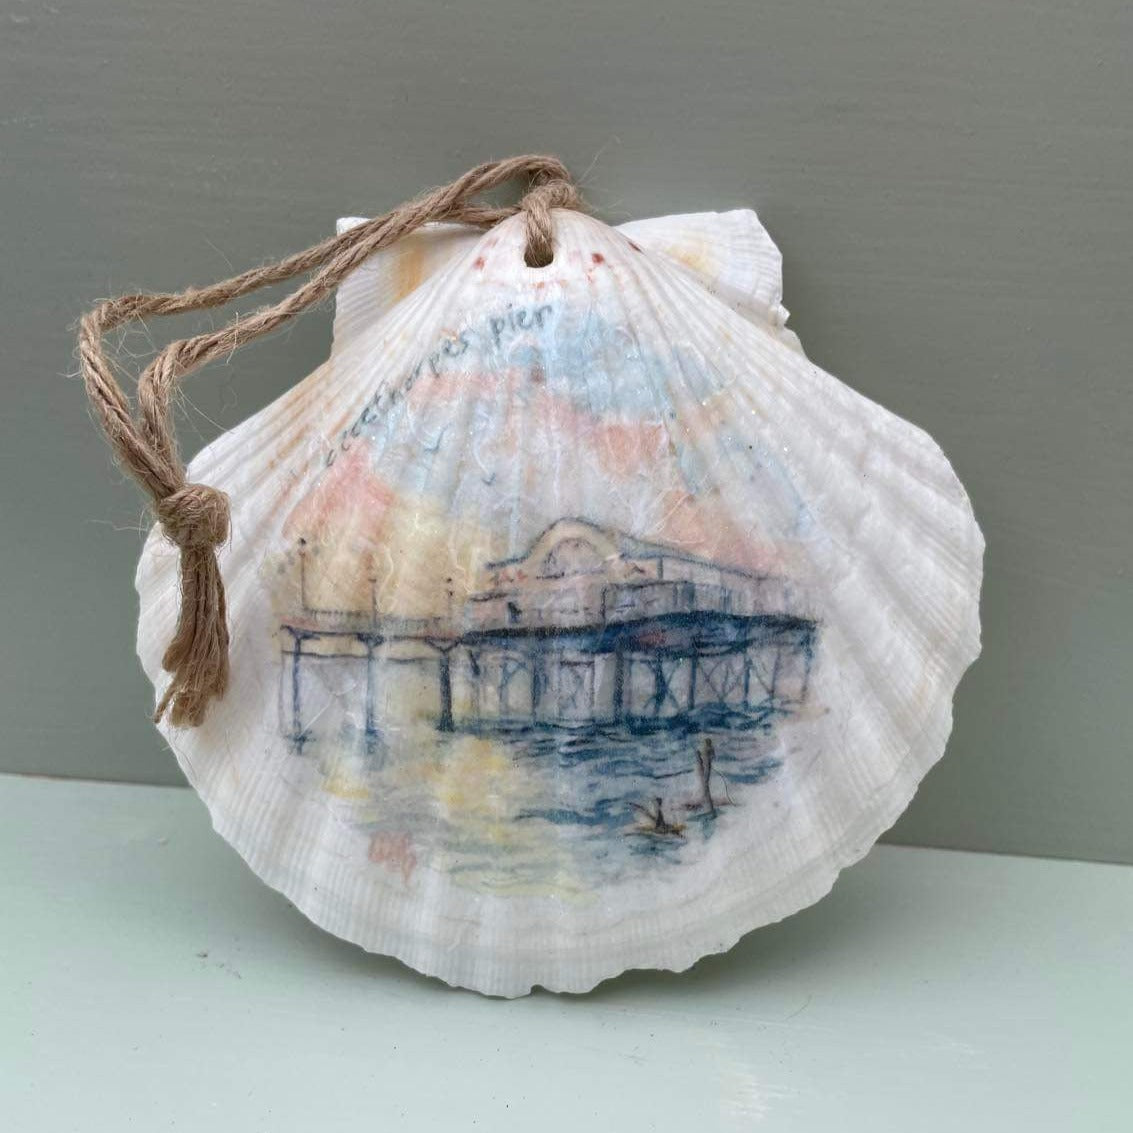 A decoupaged shell featuring a watercolour illustration of the Cleethorpes Pier by local businesses Eve Leoni Art and Jollypotz.